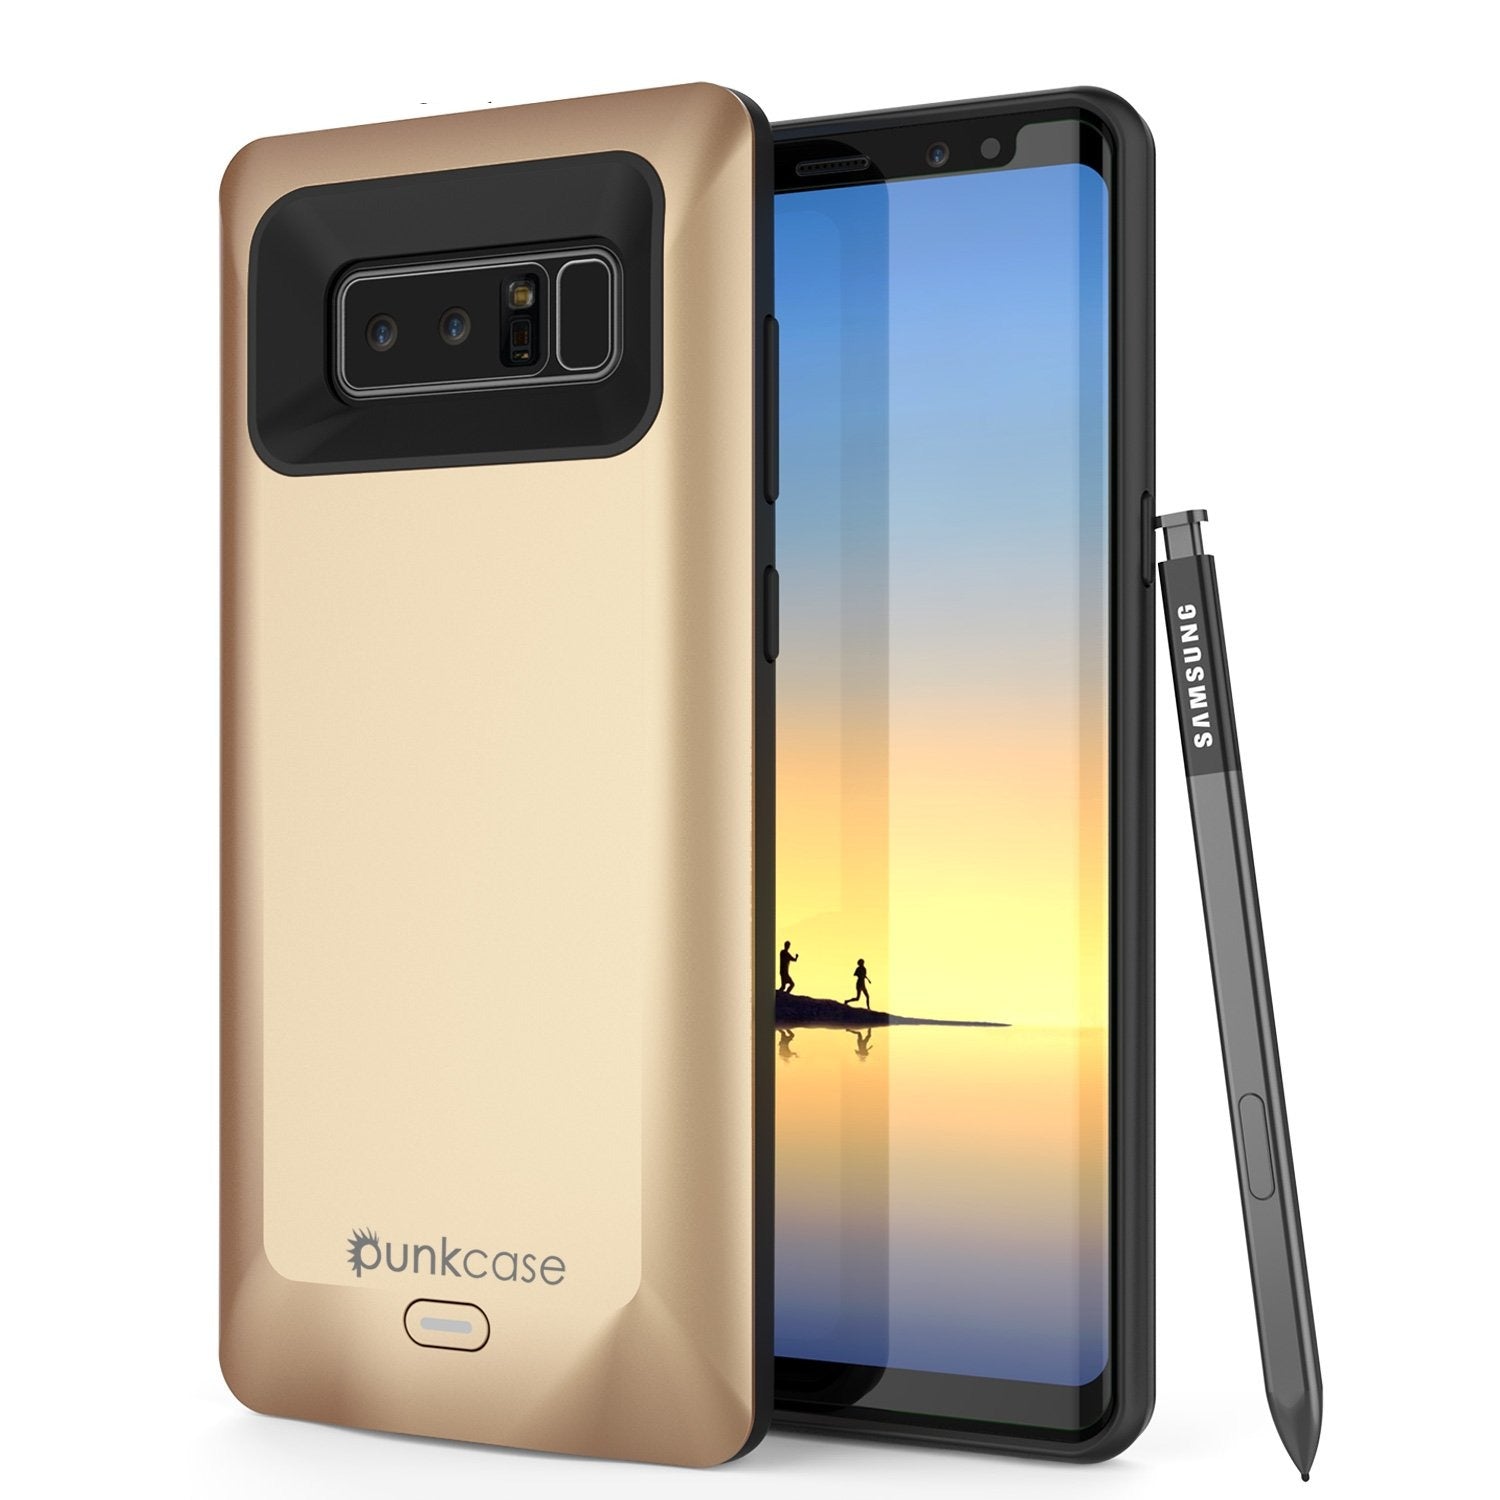 Galaxy Note 8 5000mAH Battery Charger Case W/ Screen Protector [Gold]